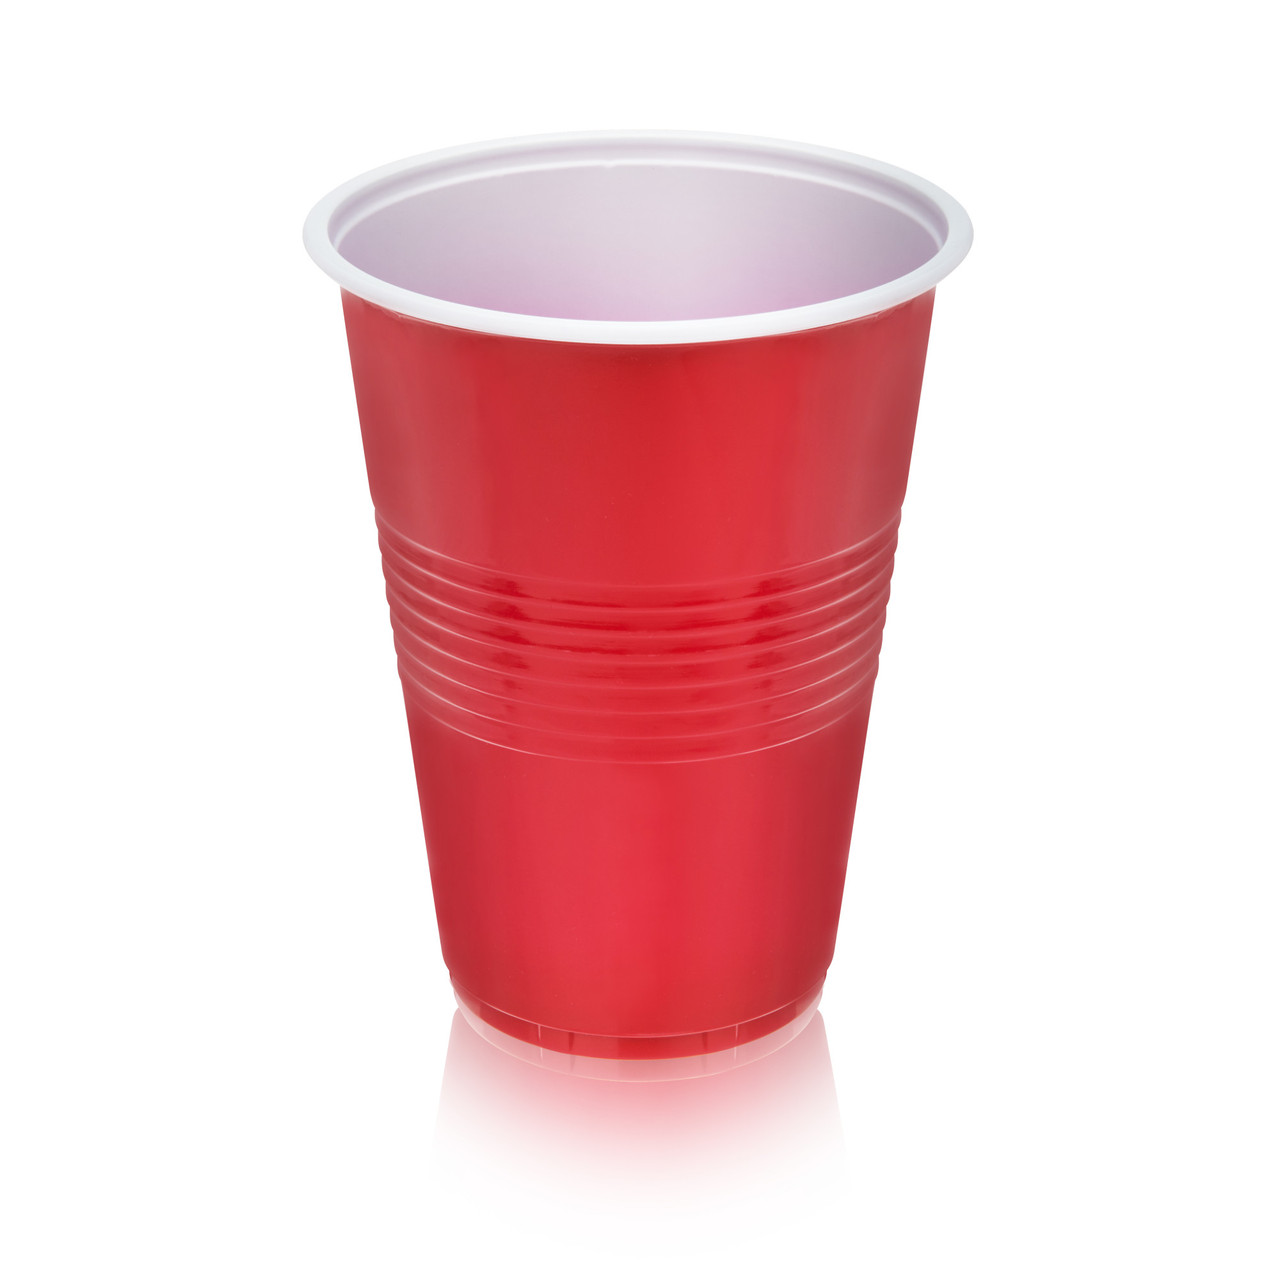 16 oz Red Party Cups, 24 pack by True